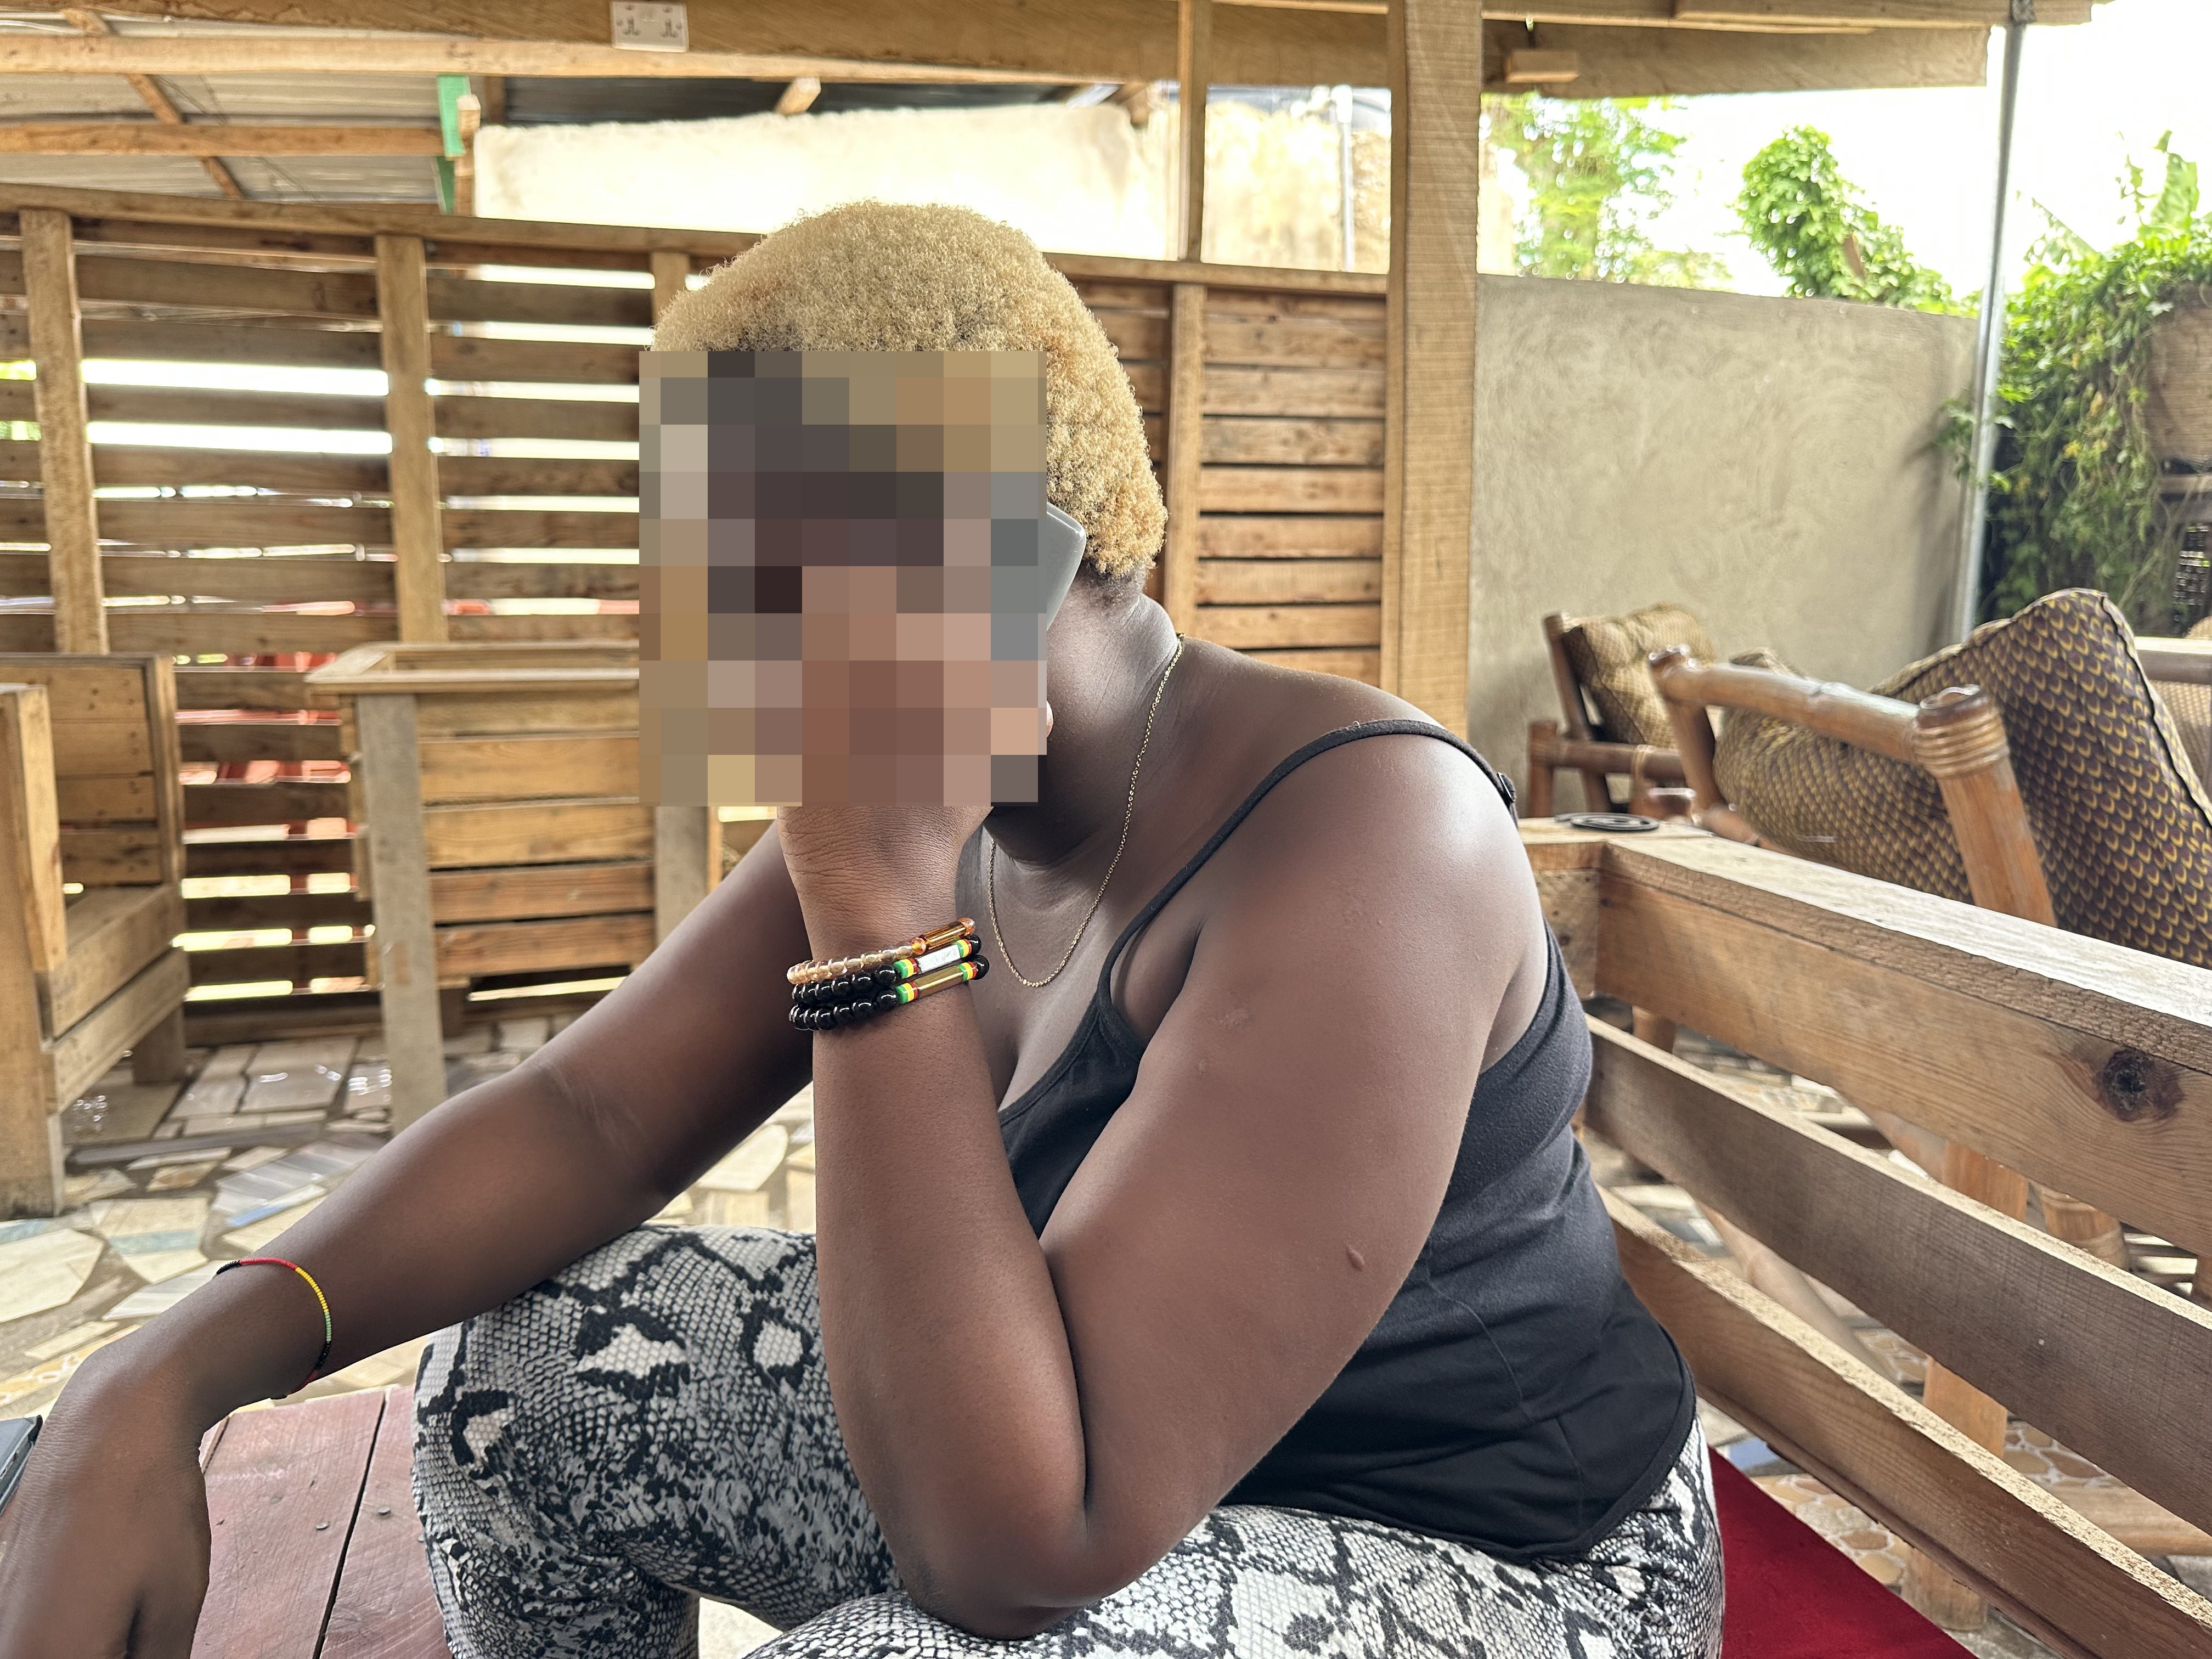 I knew it was a risk A Nigerian migrant sex worker in Ghana Womens Rights Al Jazeera picture